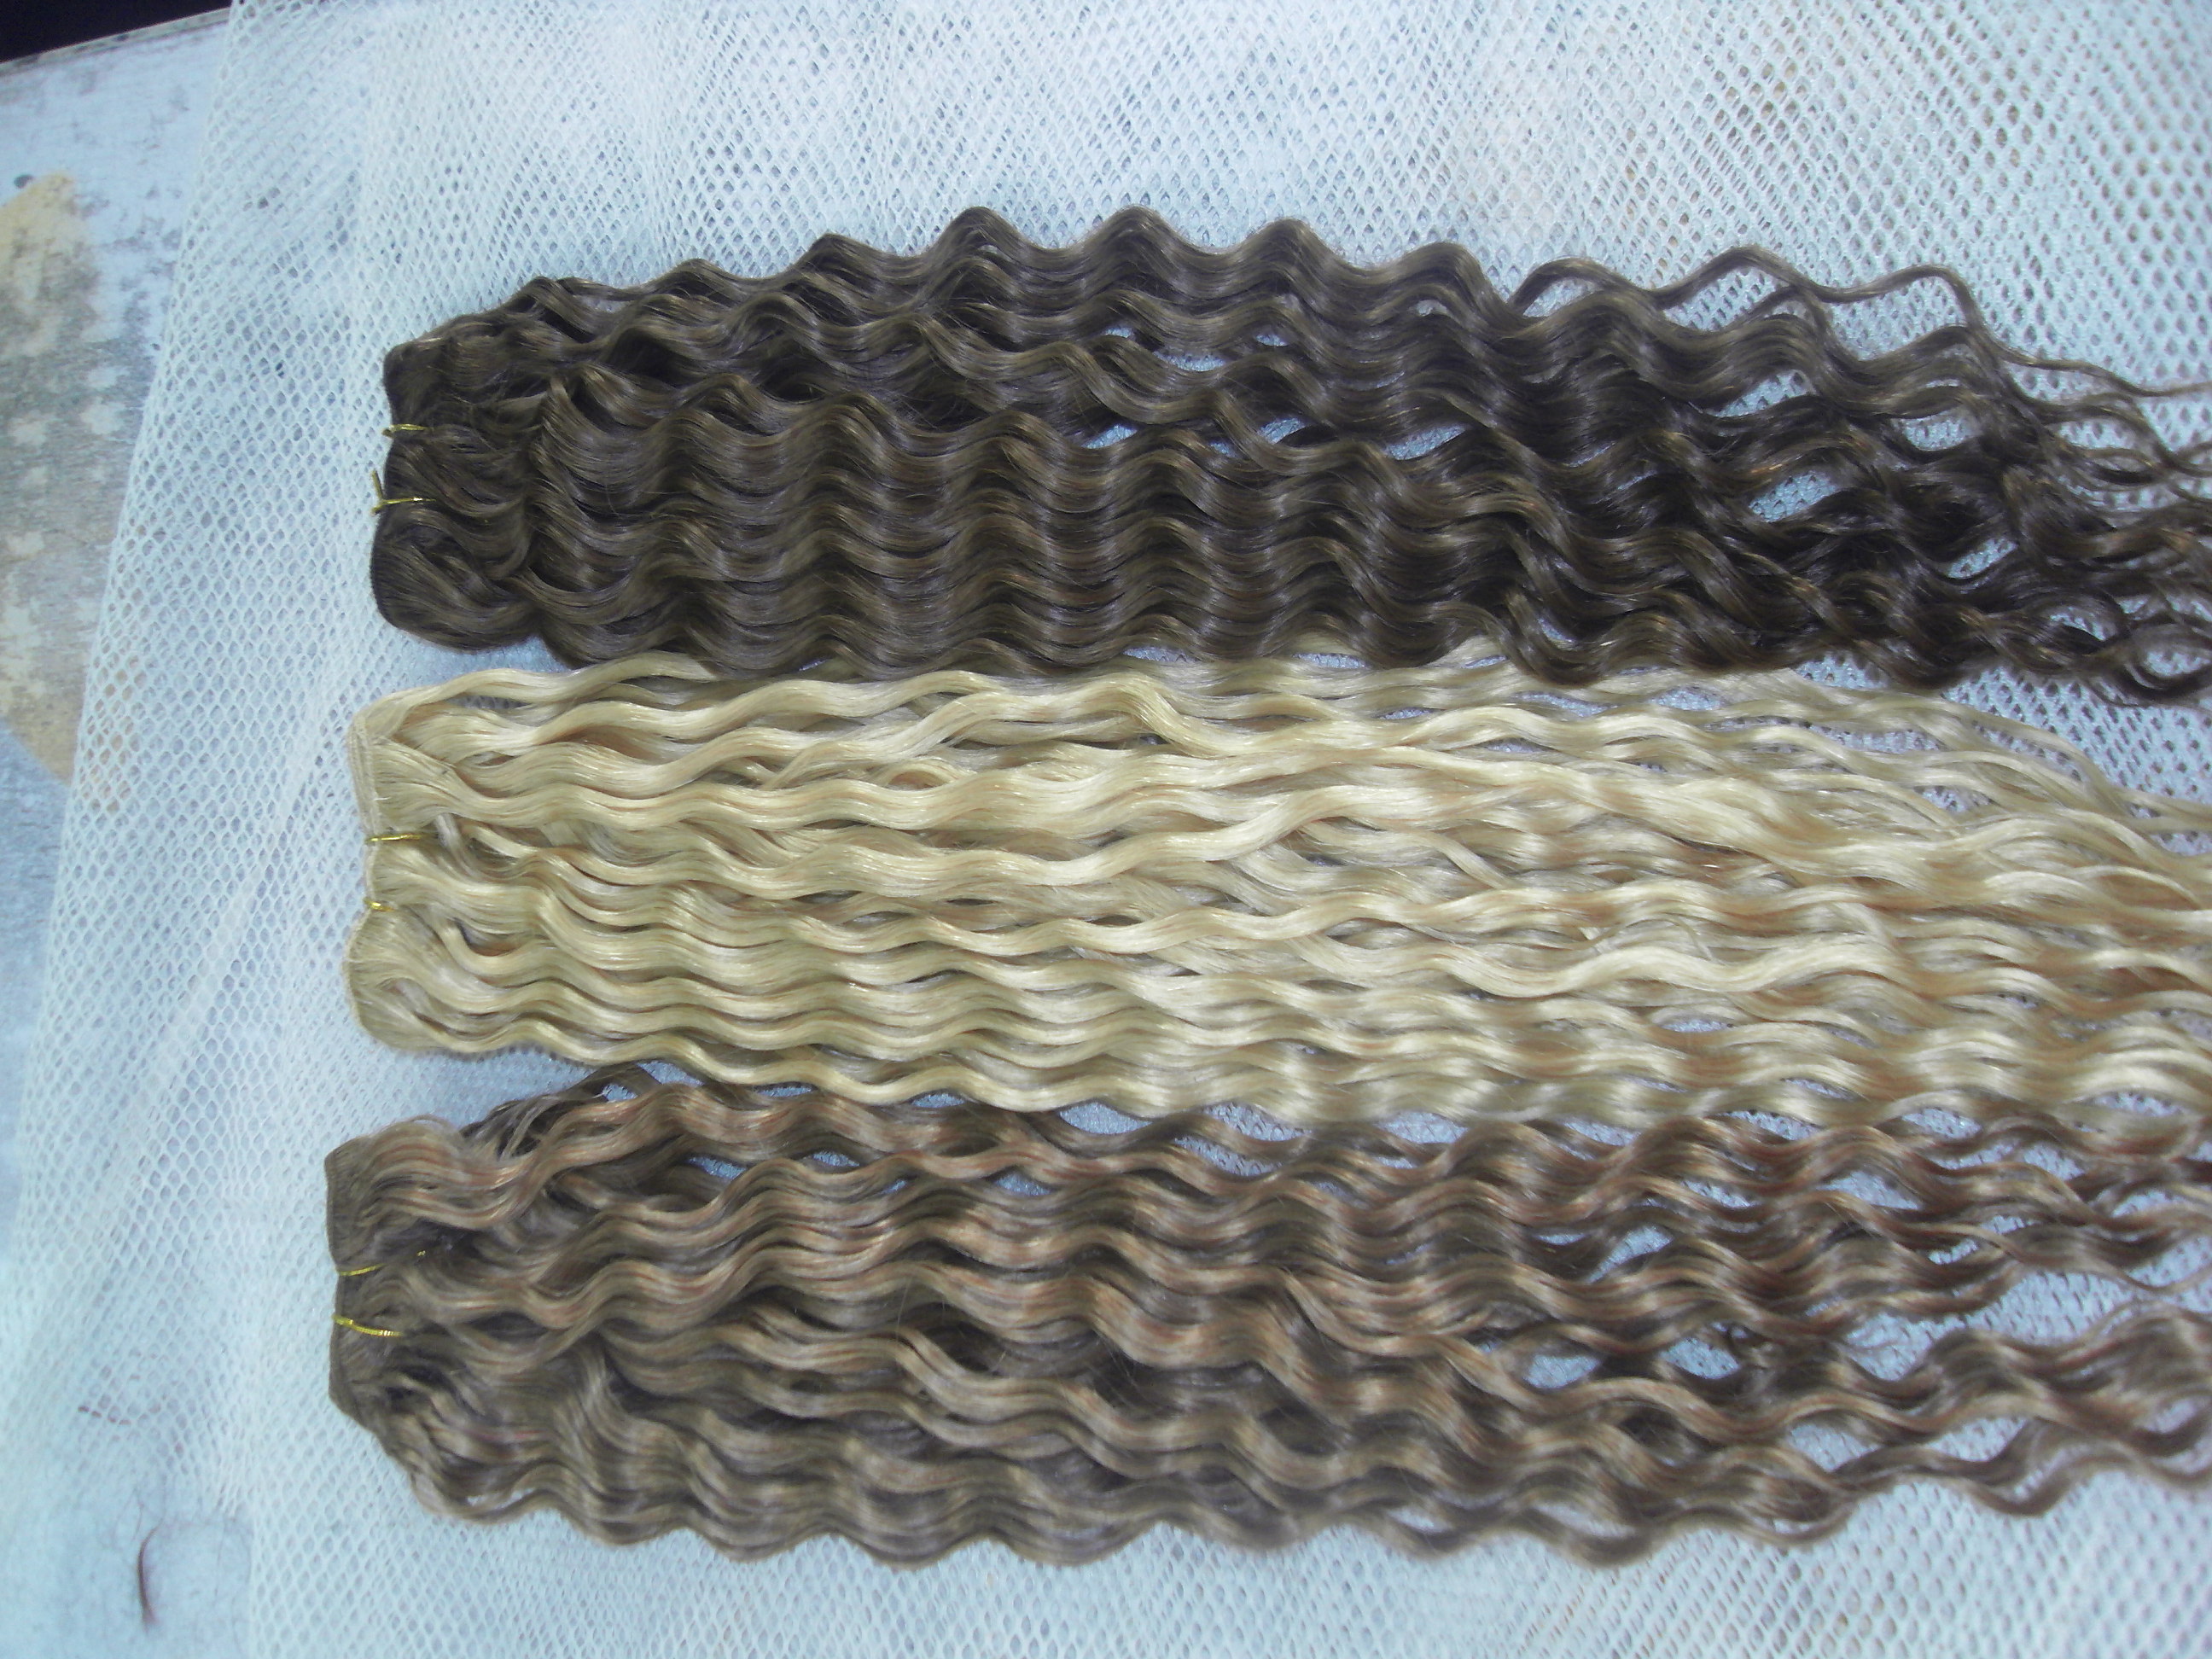 Full cuticle unprocessed high quality no tangle double weft wholesale human virgin wavy european hair weft